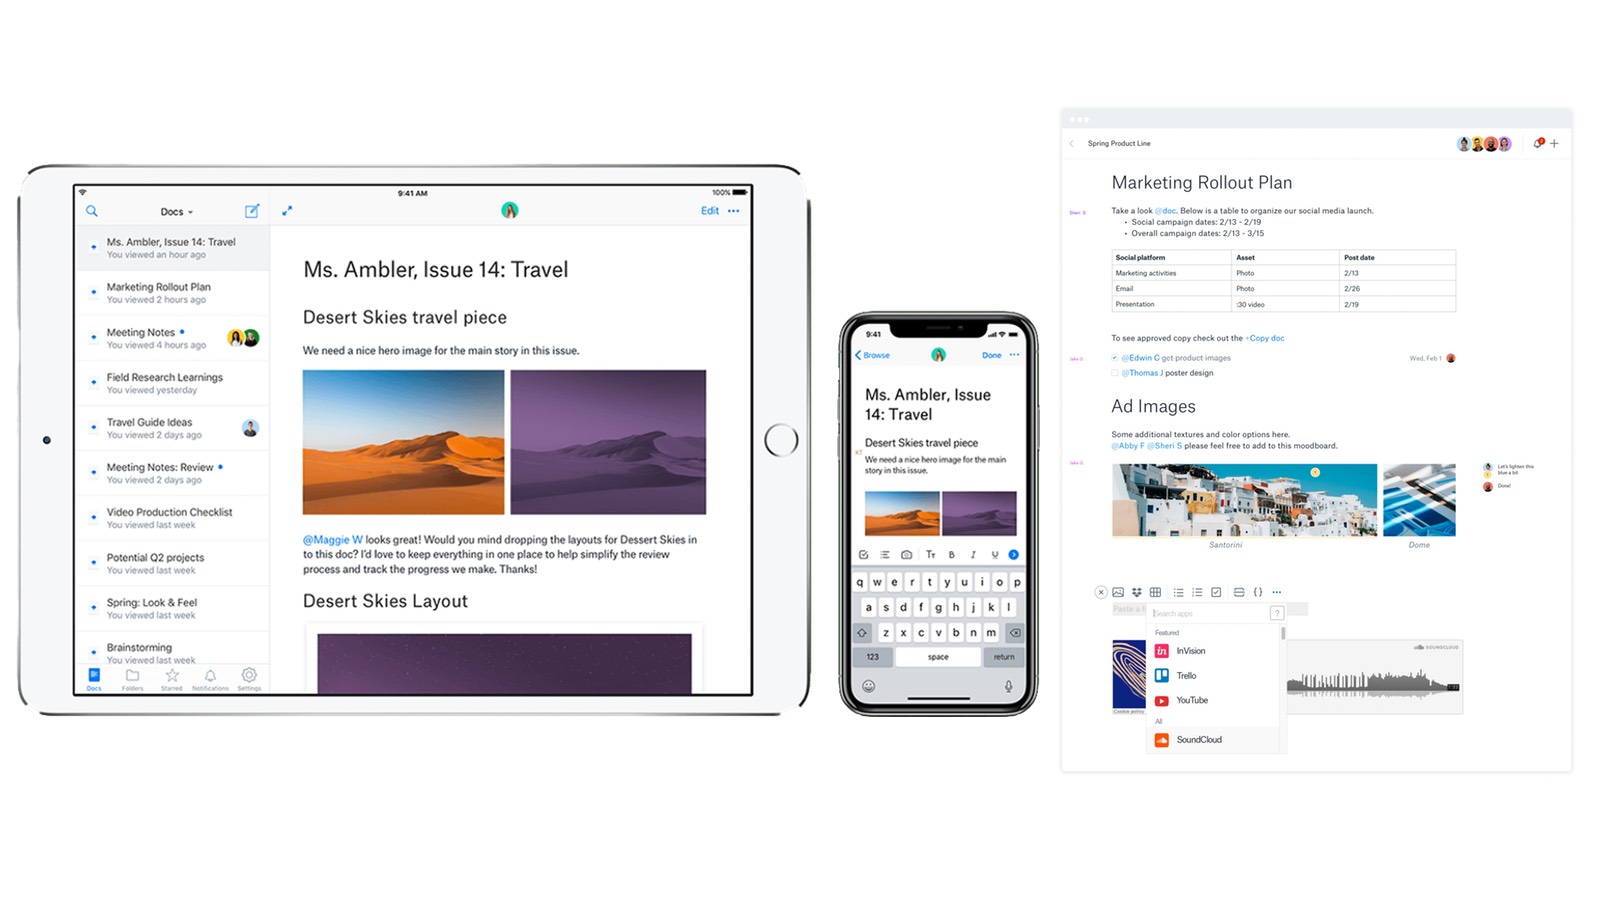 Dropbox Paper – When File Sync And Share Moves To Collaboration